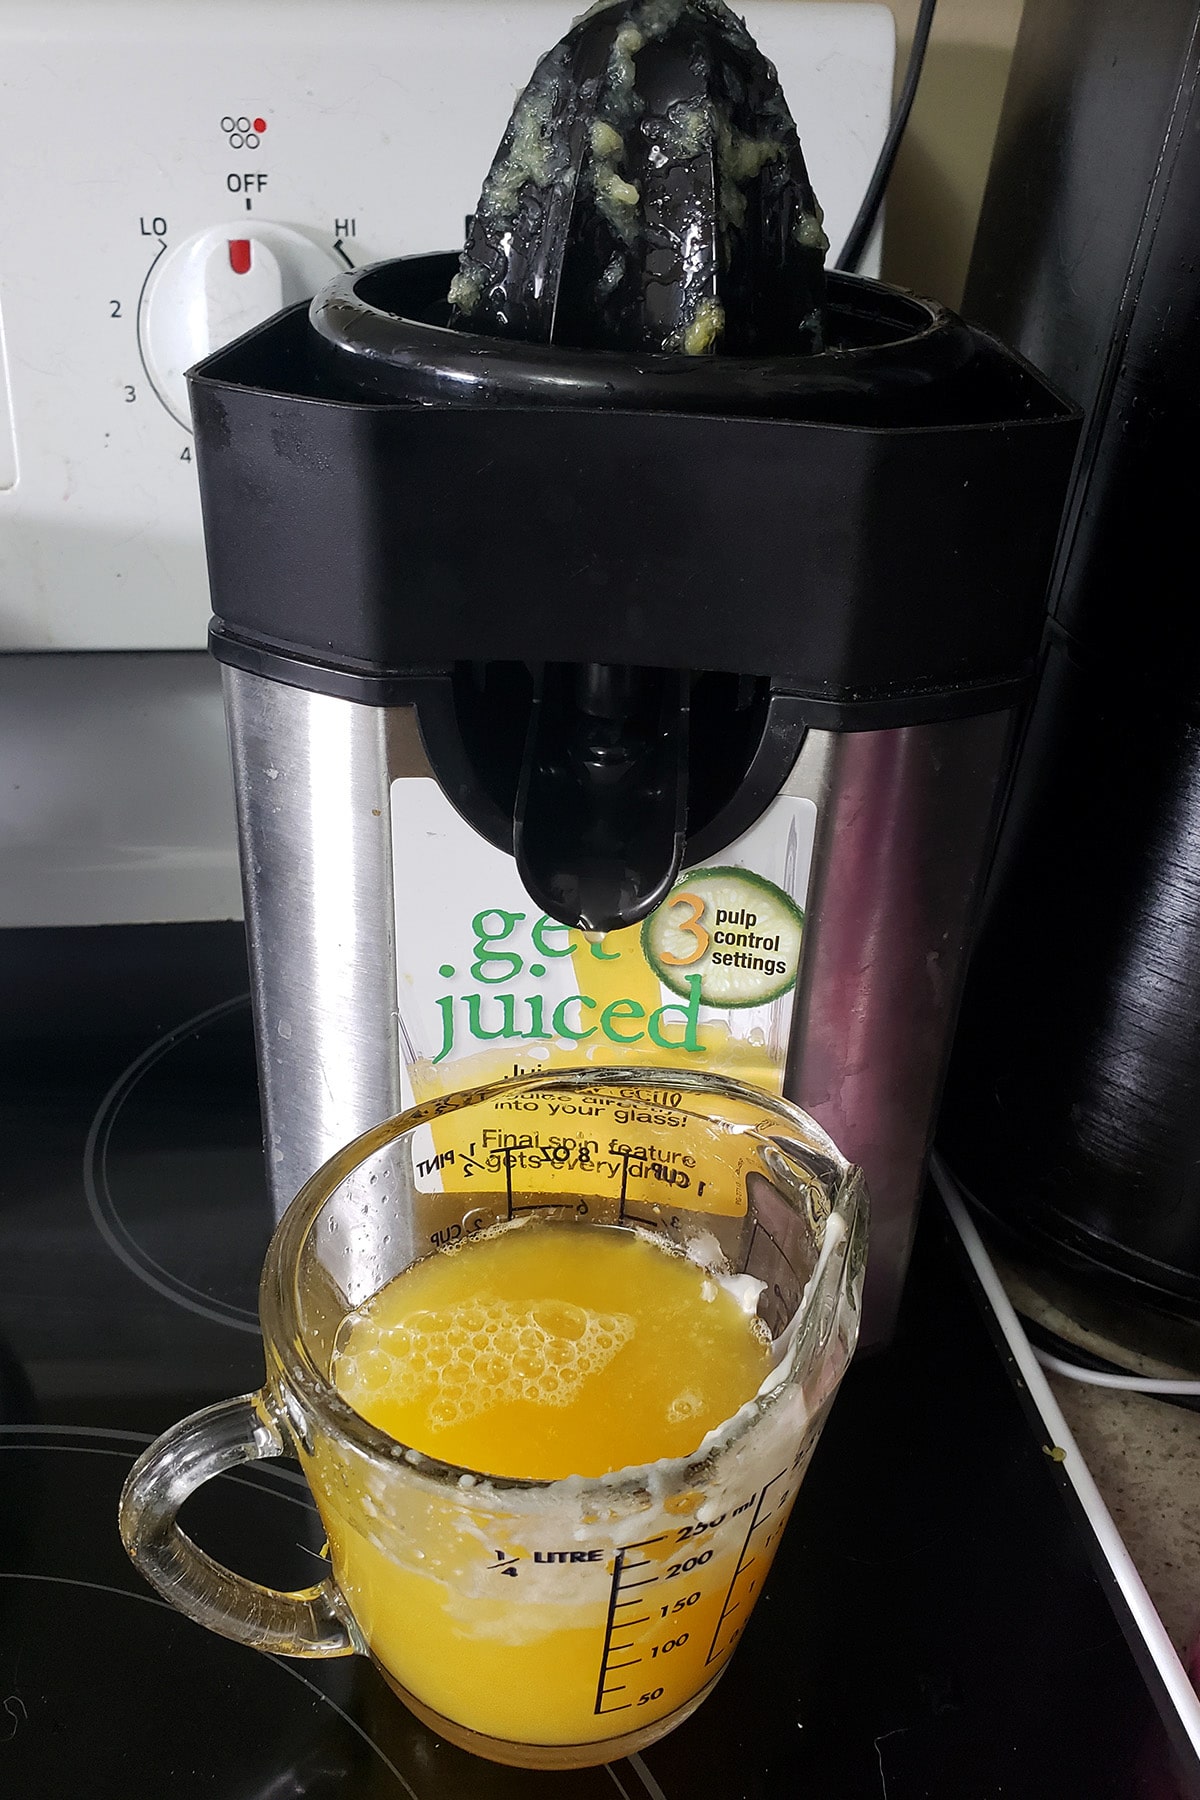 An electric juicer being used for orange juice.